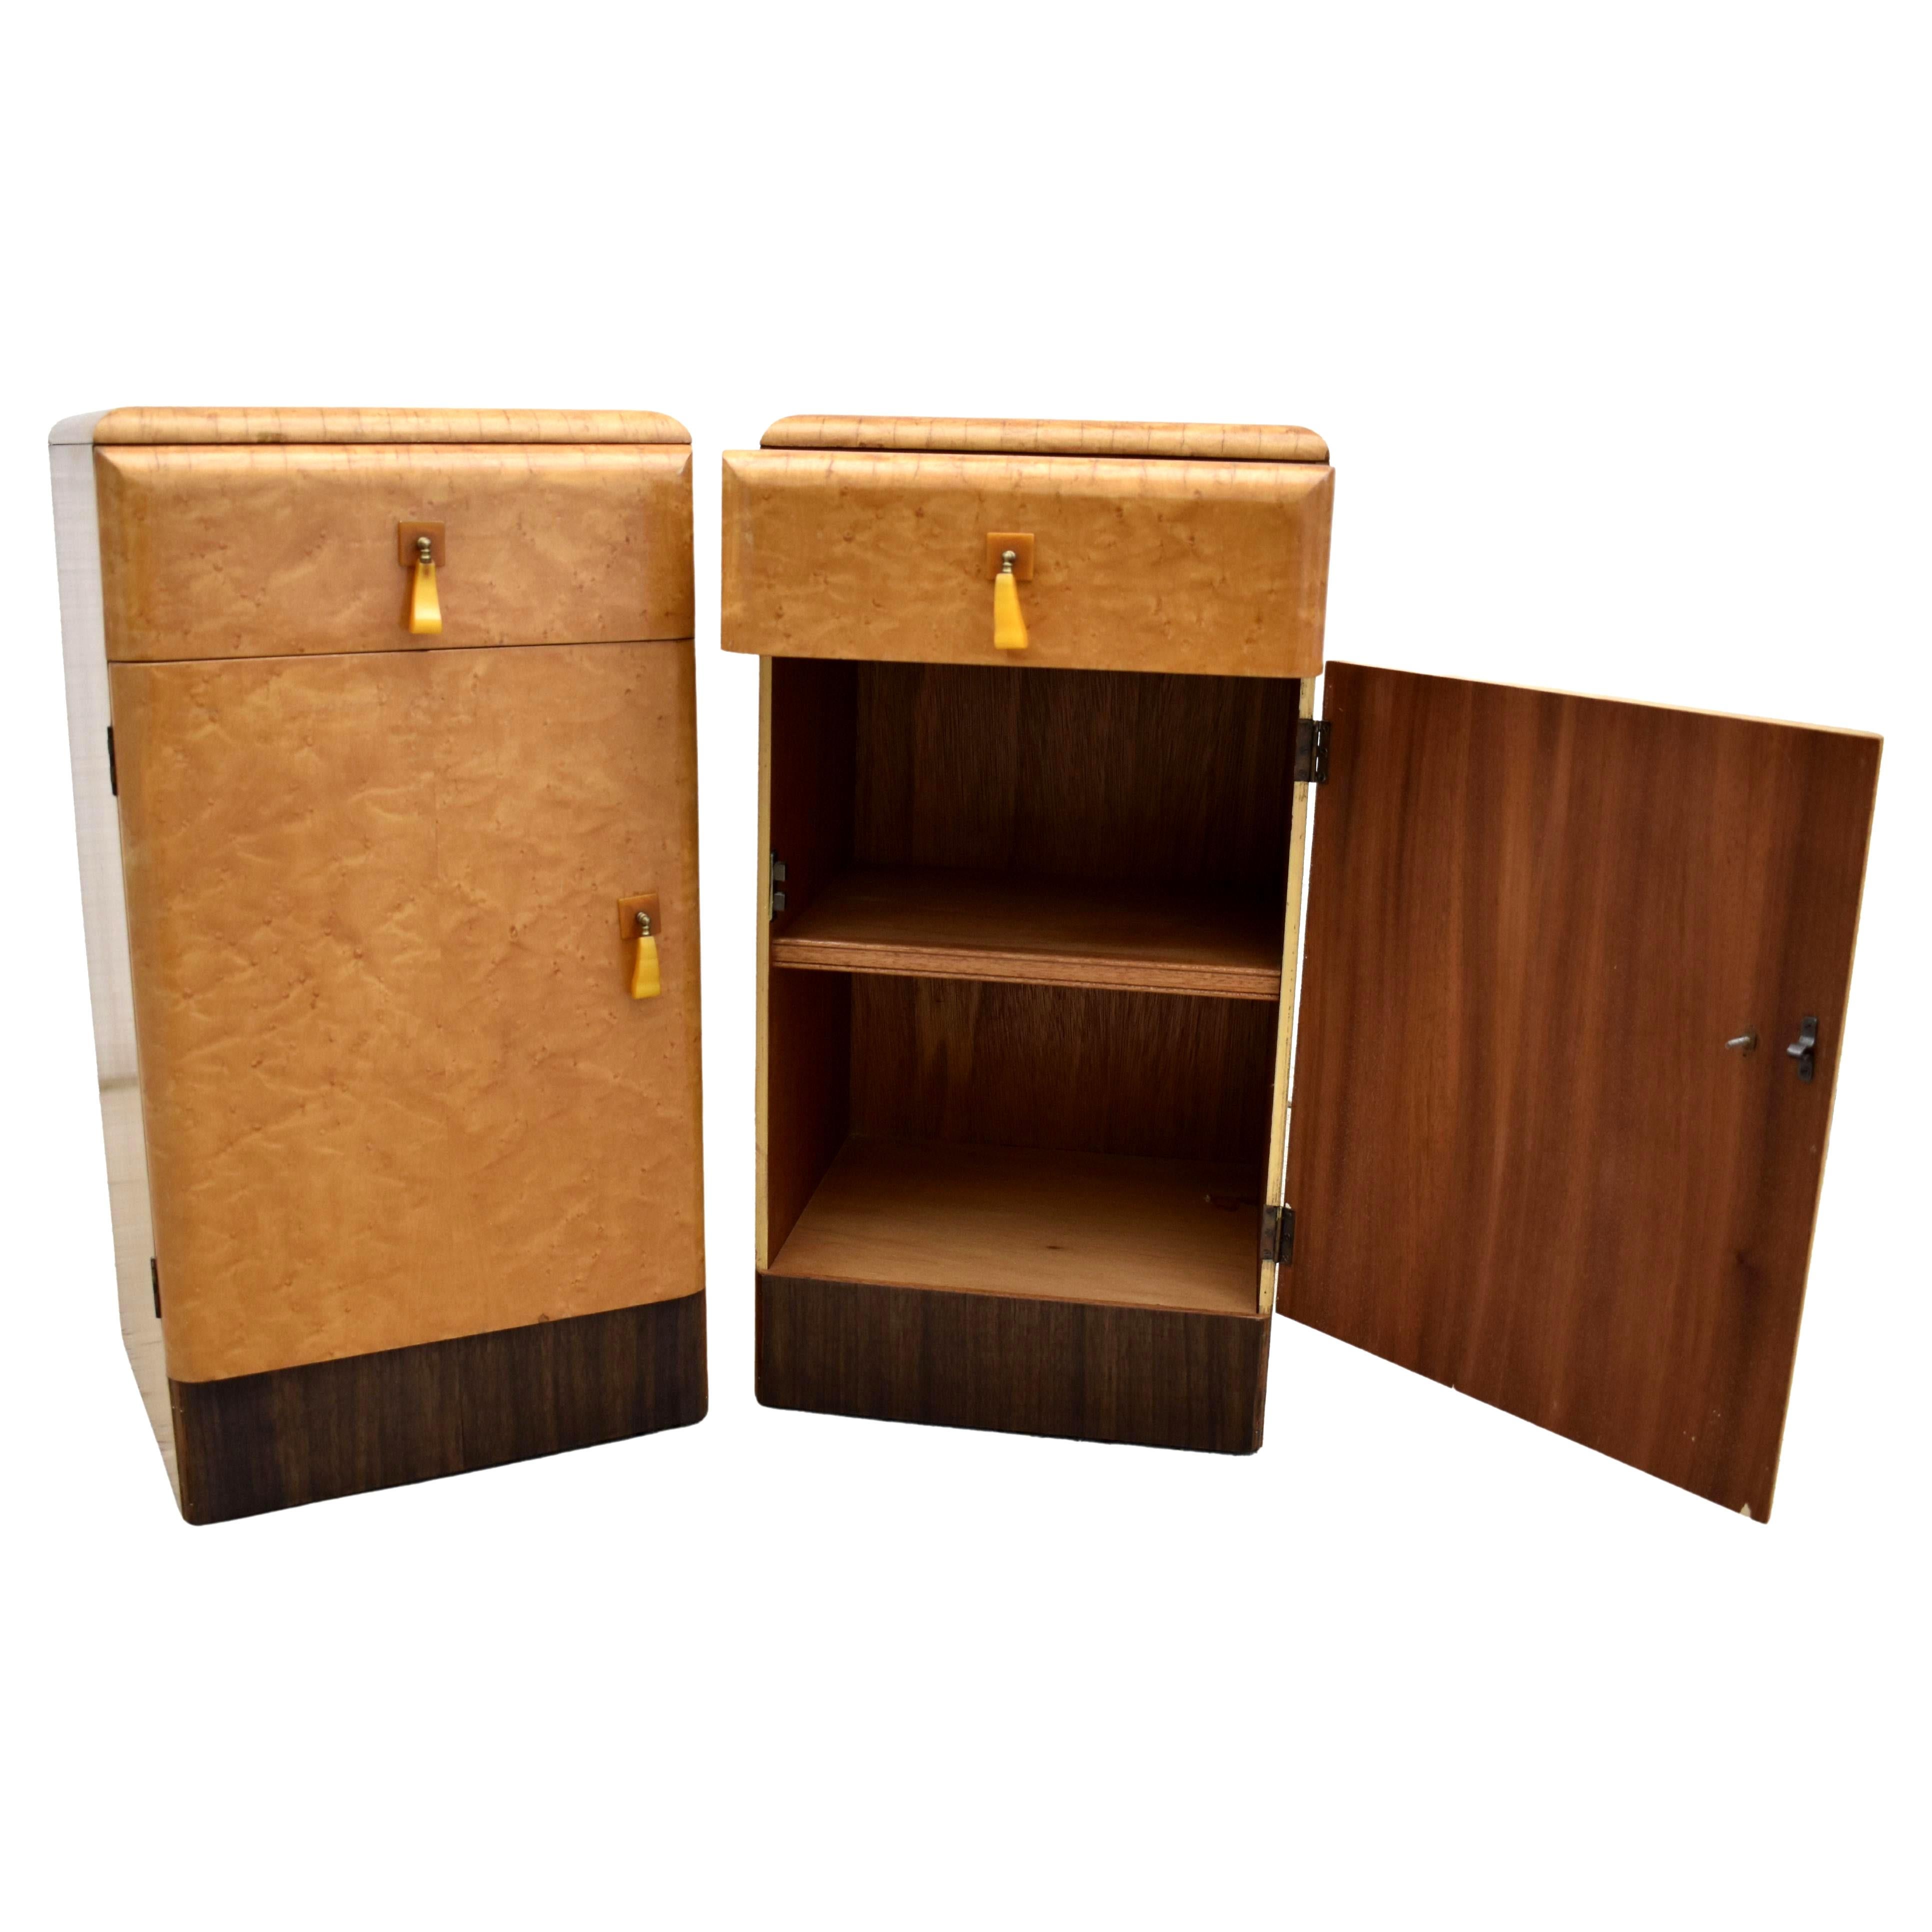 20th Century Art Deco Pair of Matching Bedside Cabinets in Blonde Maple, circa 1930s